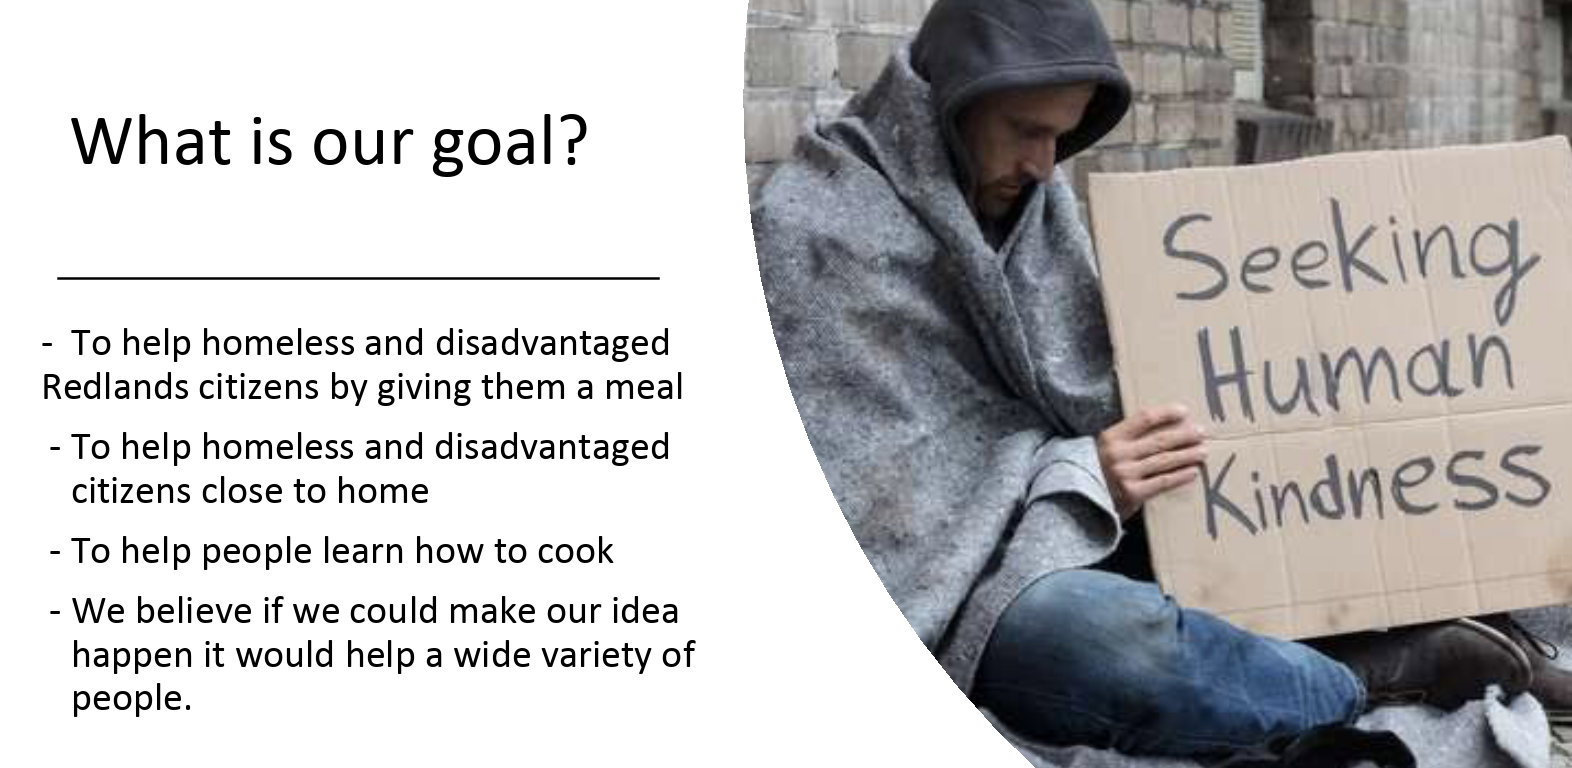 A slide explaining our goal - to help homeless citizens in the local area, teach community members how to cook, bring both groups together.